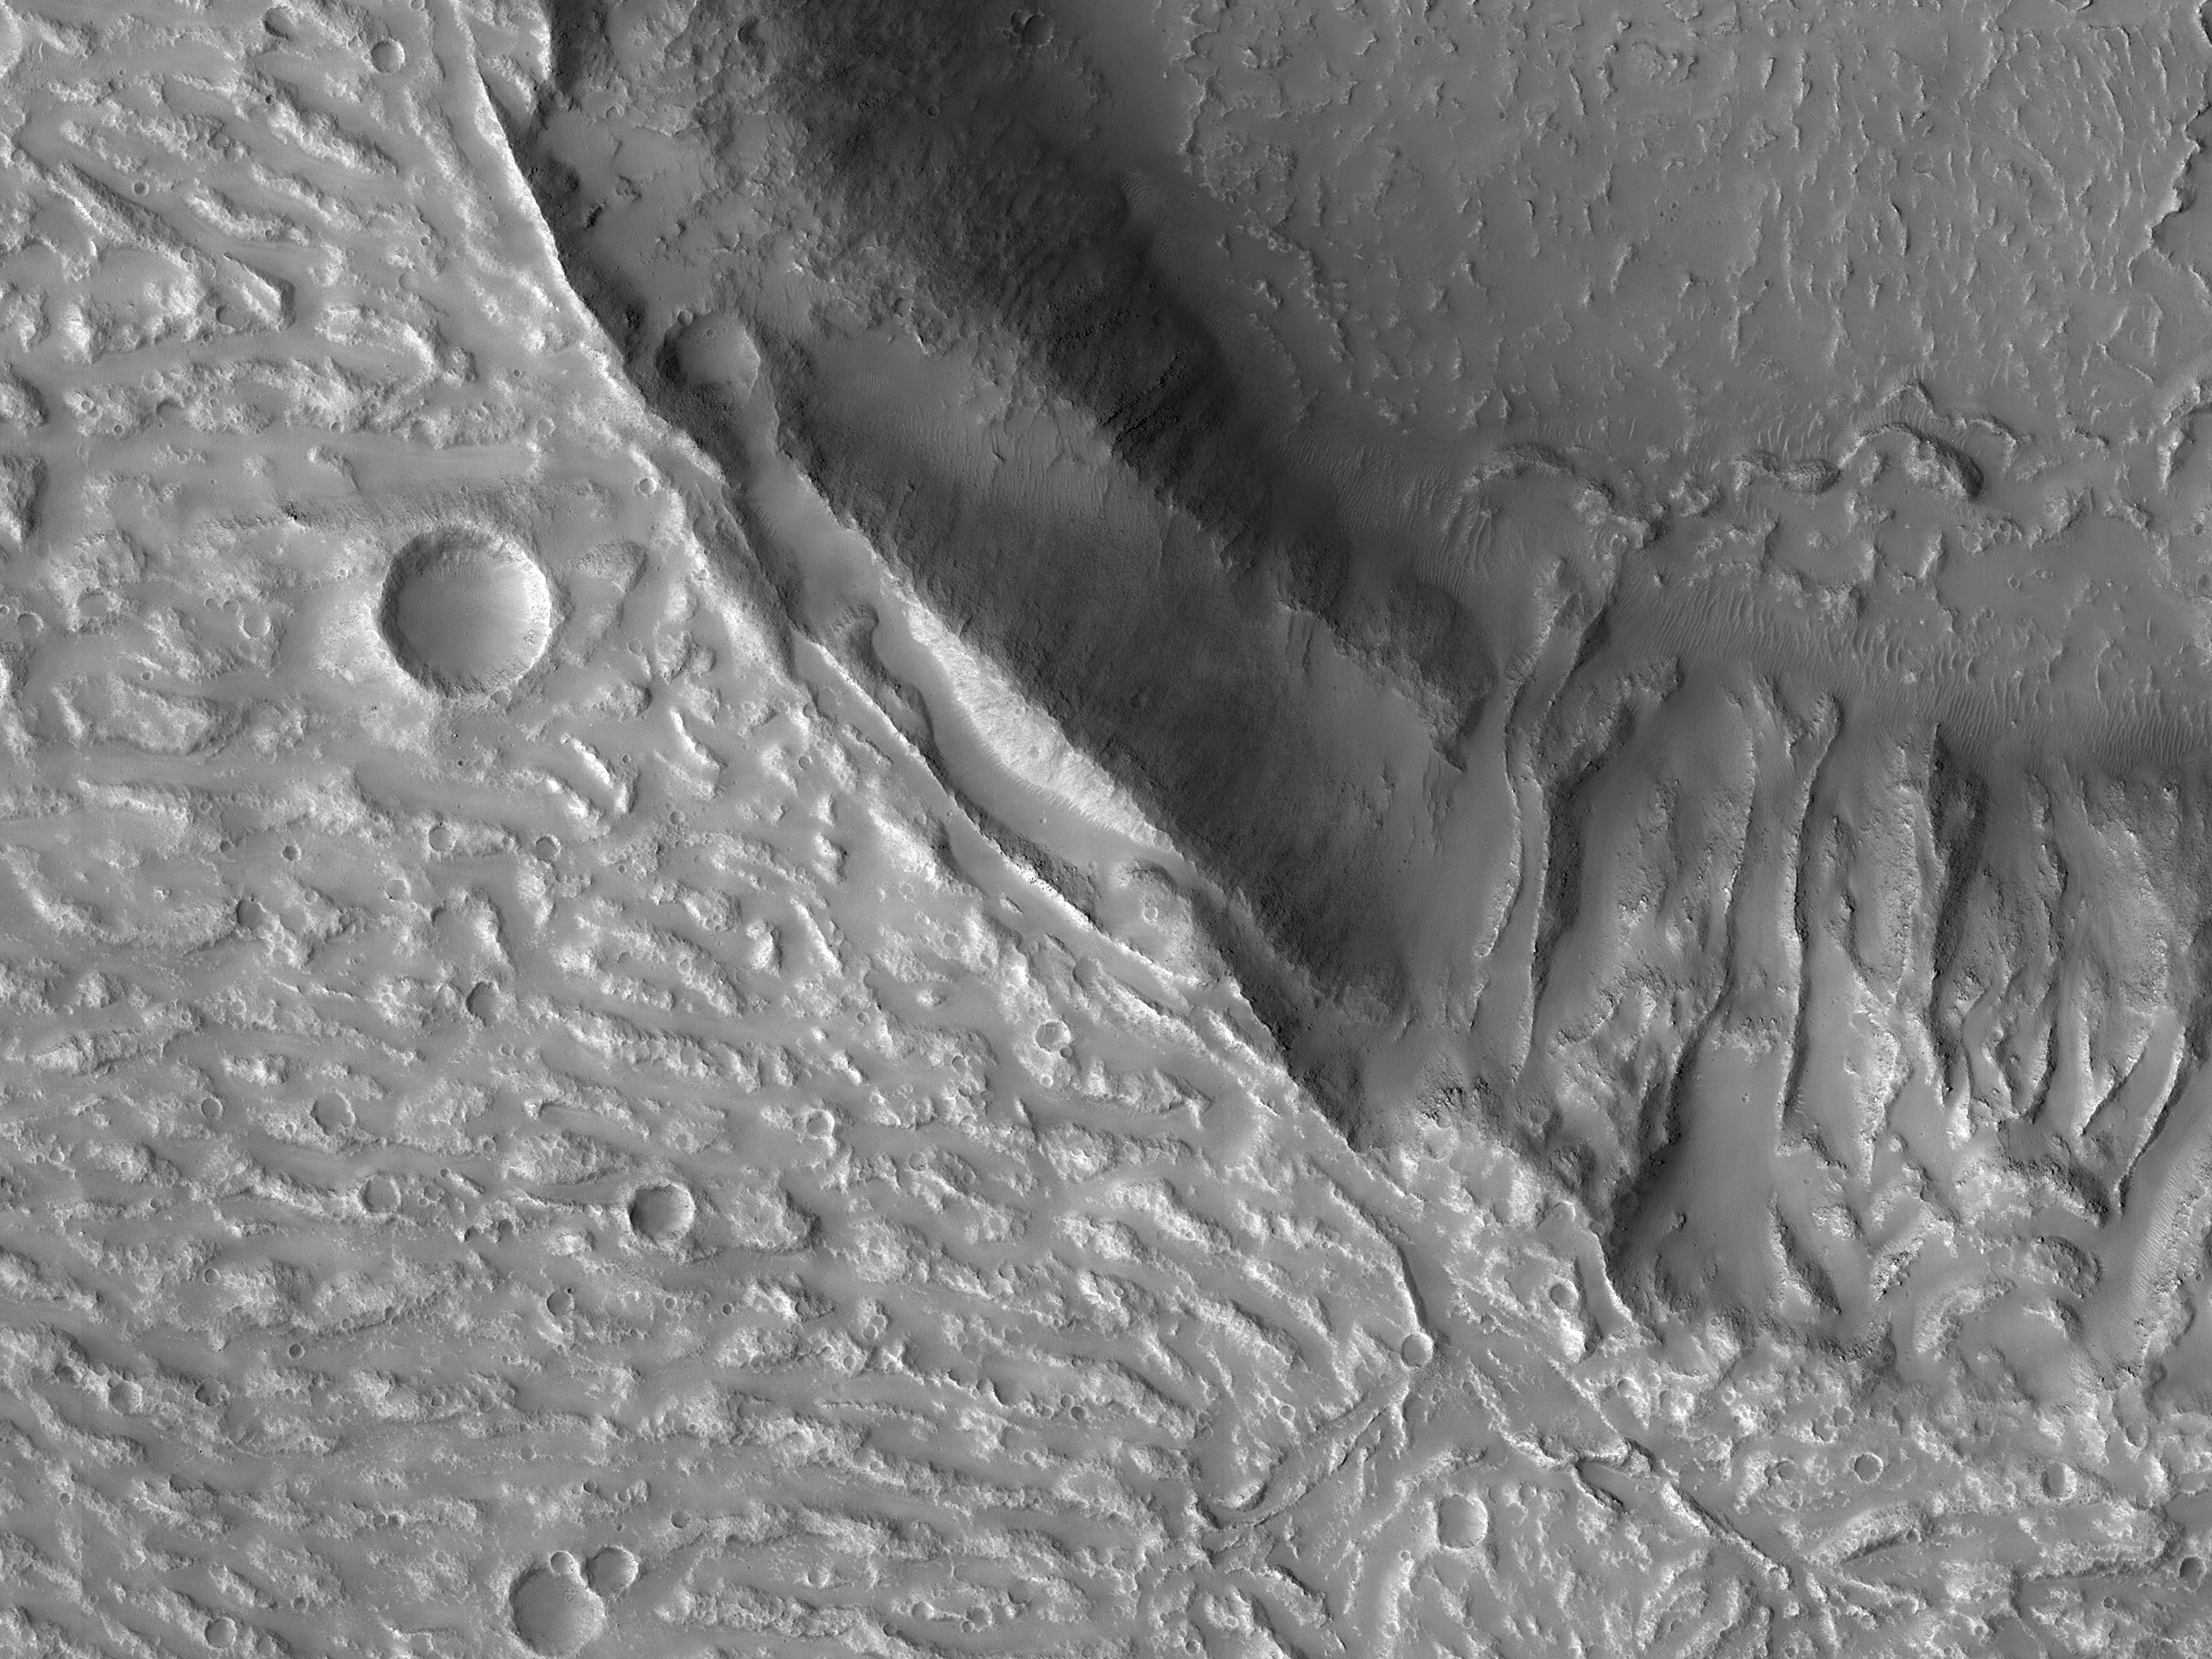 Western Flank of Crater Overtopped by Flows